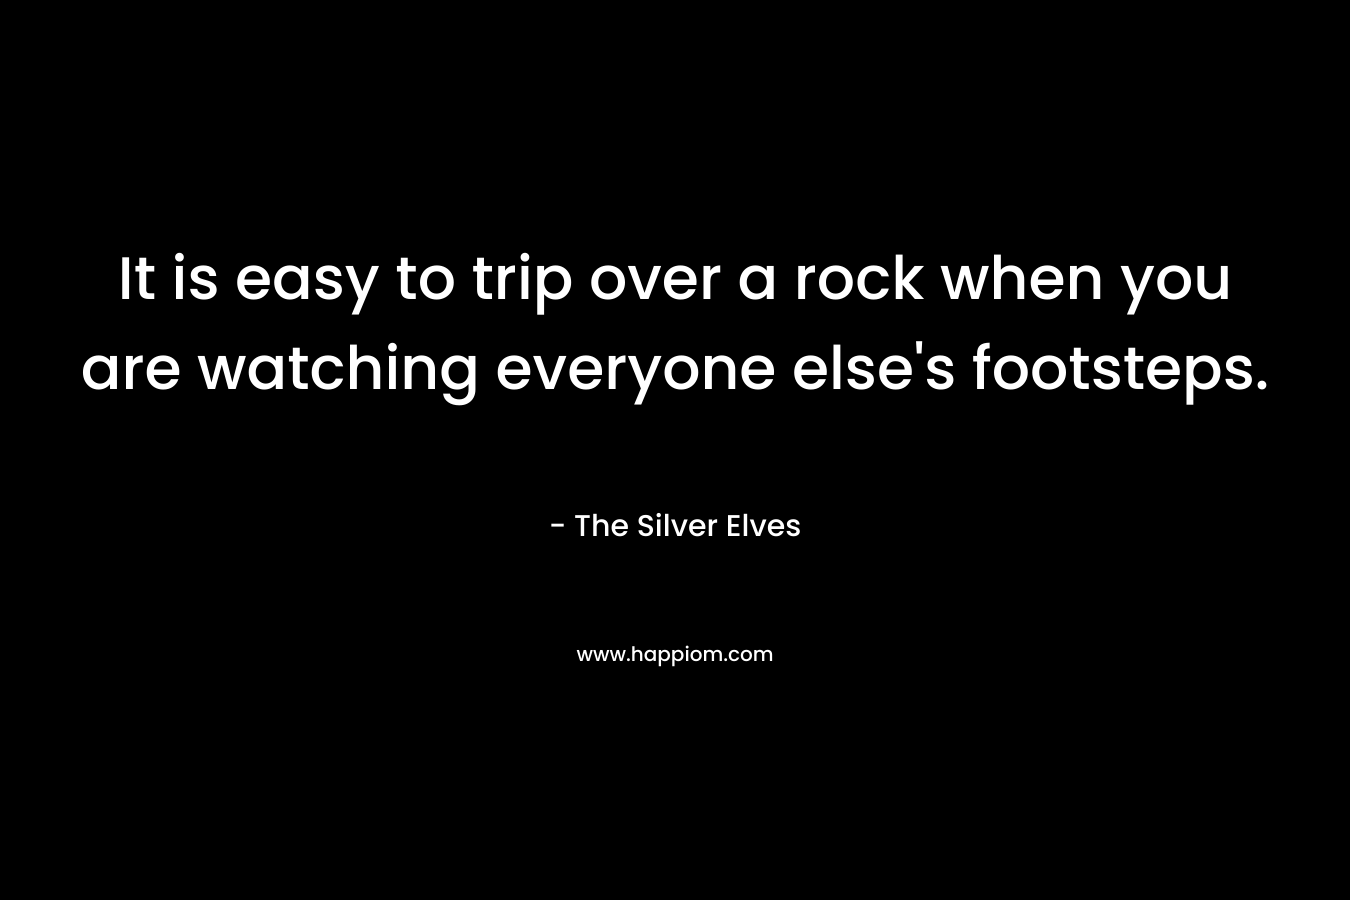 It is easy to trip over a rock when you are watching everyone else’s footsteps. – The Silver Elves